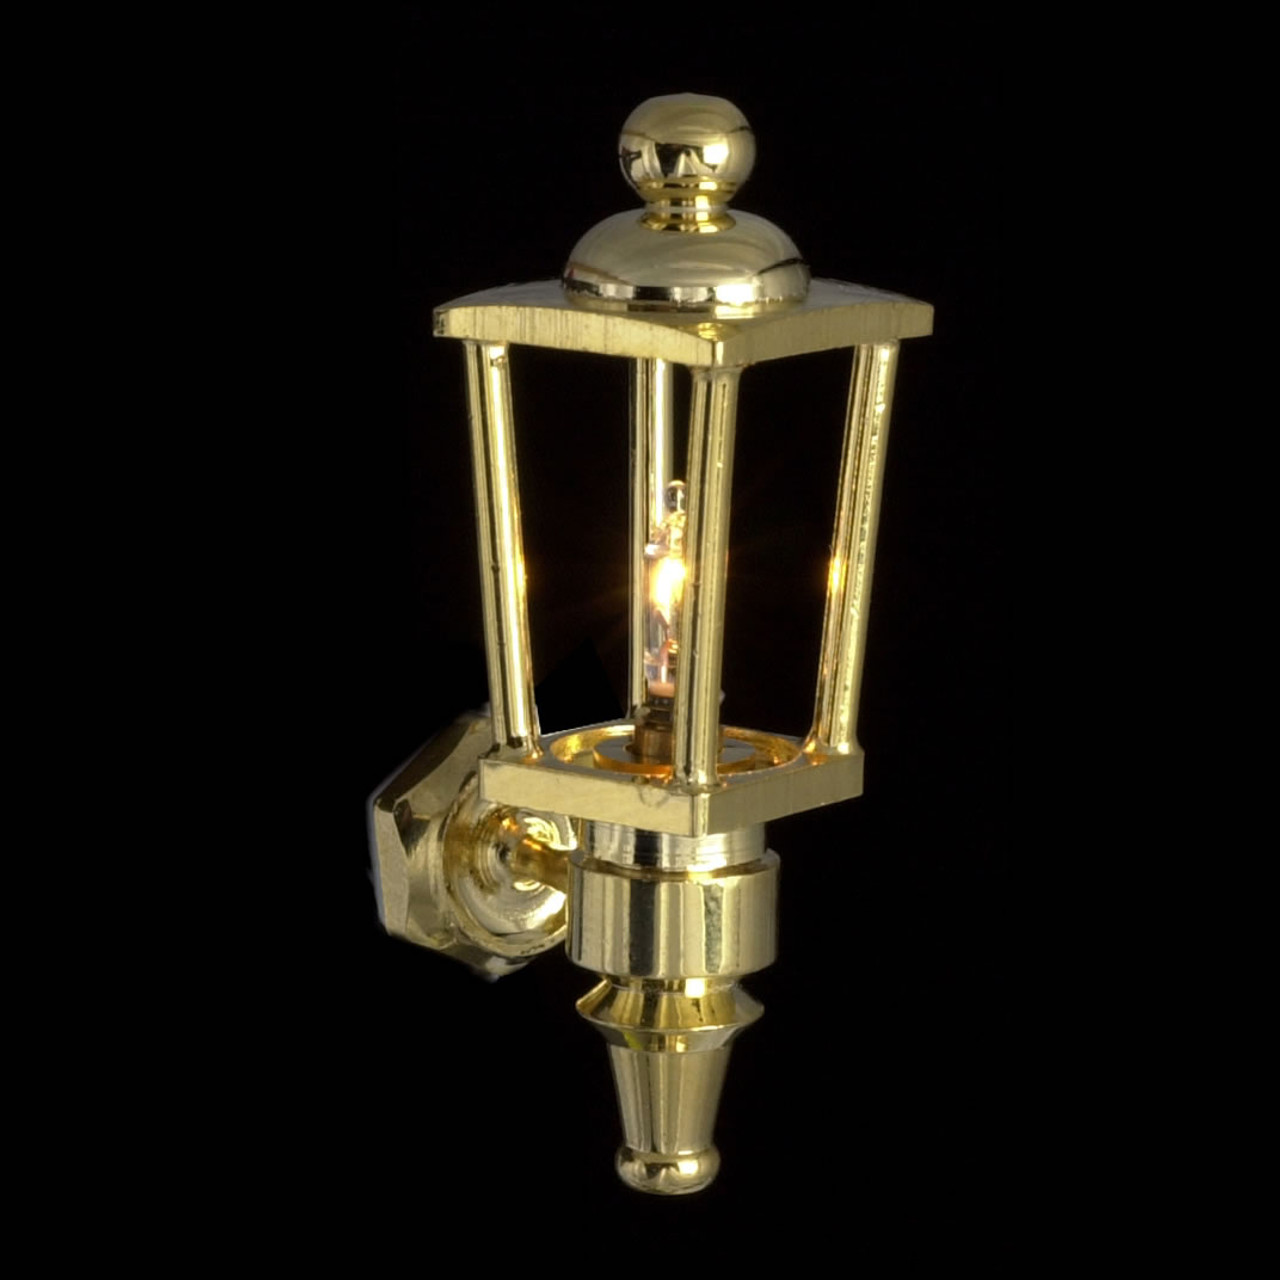 Houseworks LED Miniature Brass Carriage Wall Lamp Battery Operated – Real  Good Toys